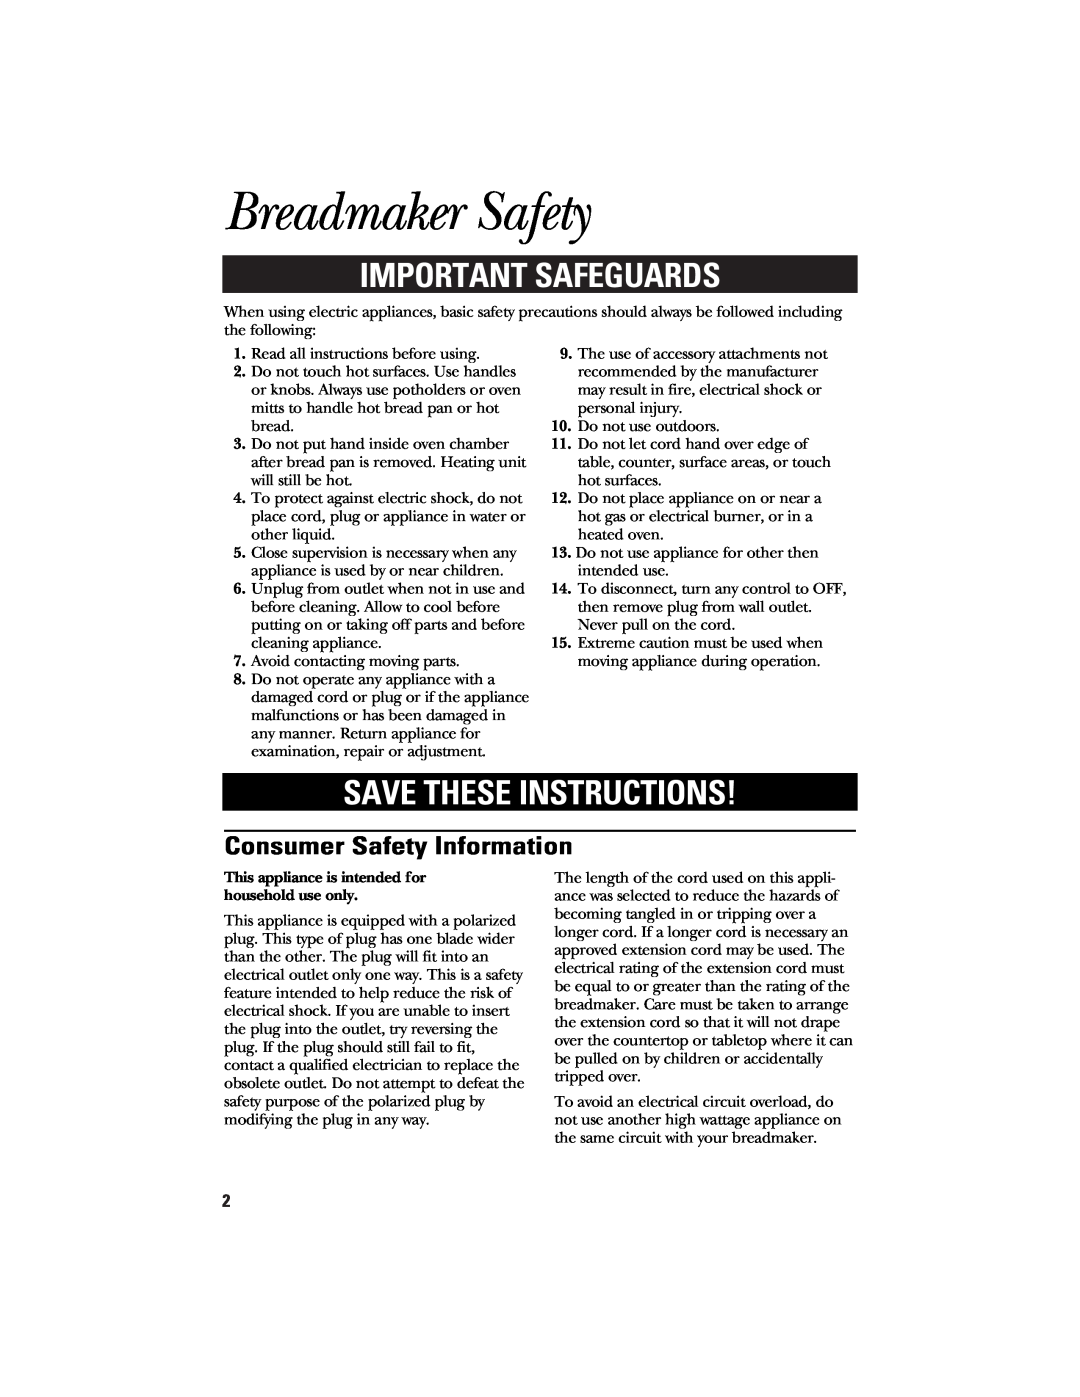 GE 106732, 840081600 Breadmaker Safety, Important Safeguards, Save These Instructions, Consumer Safety Information 